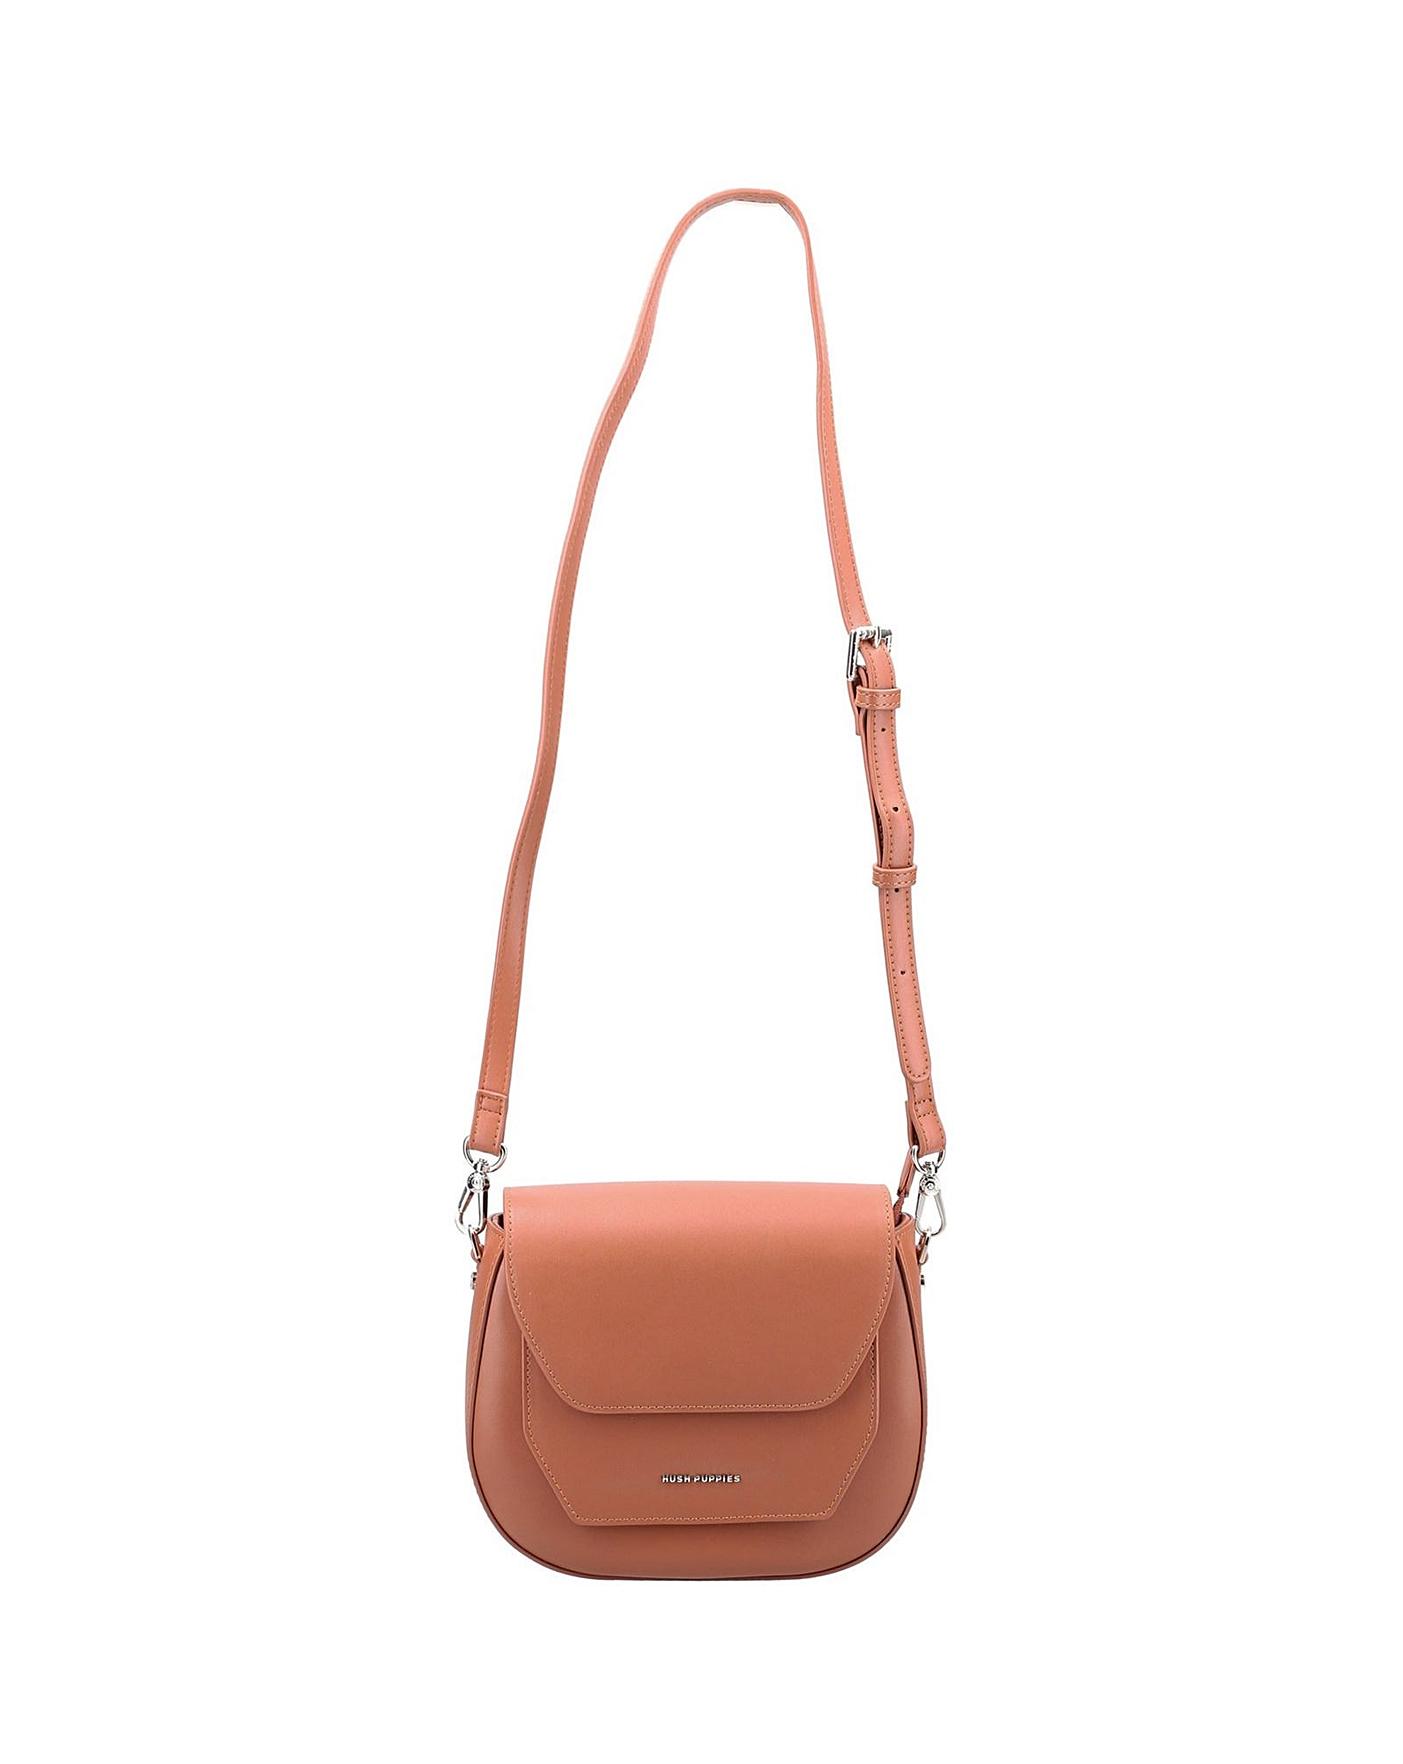 Buy Hush Puppies Pearlyn Bag from the Laura Ashley online shop